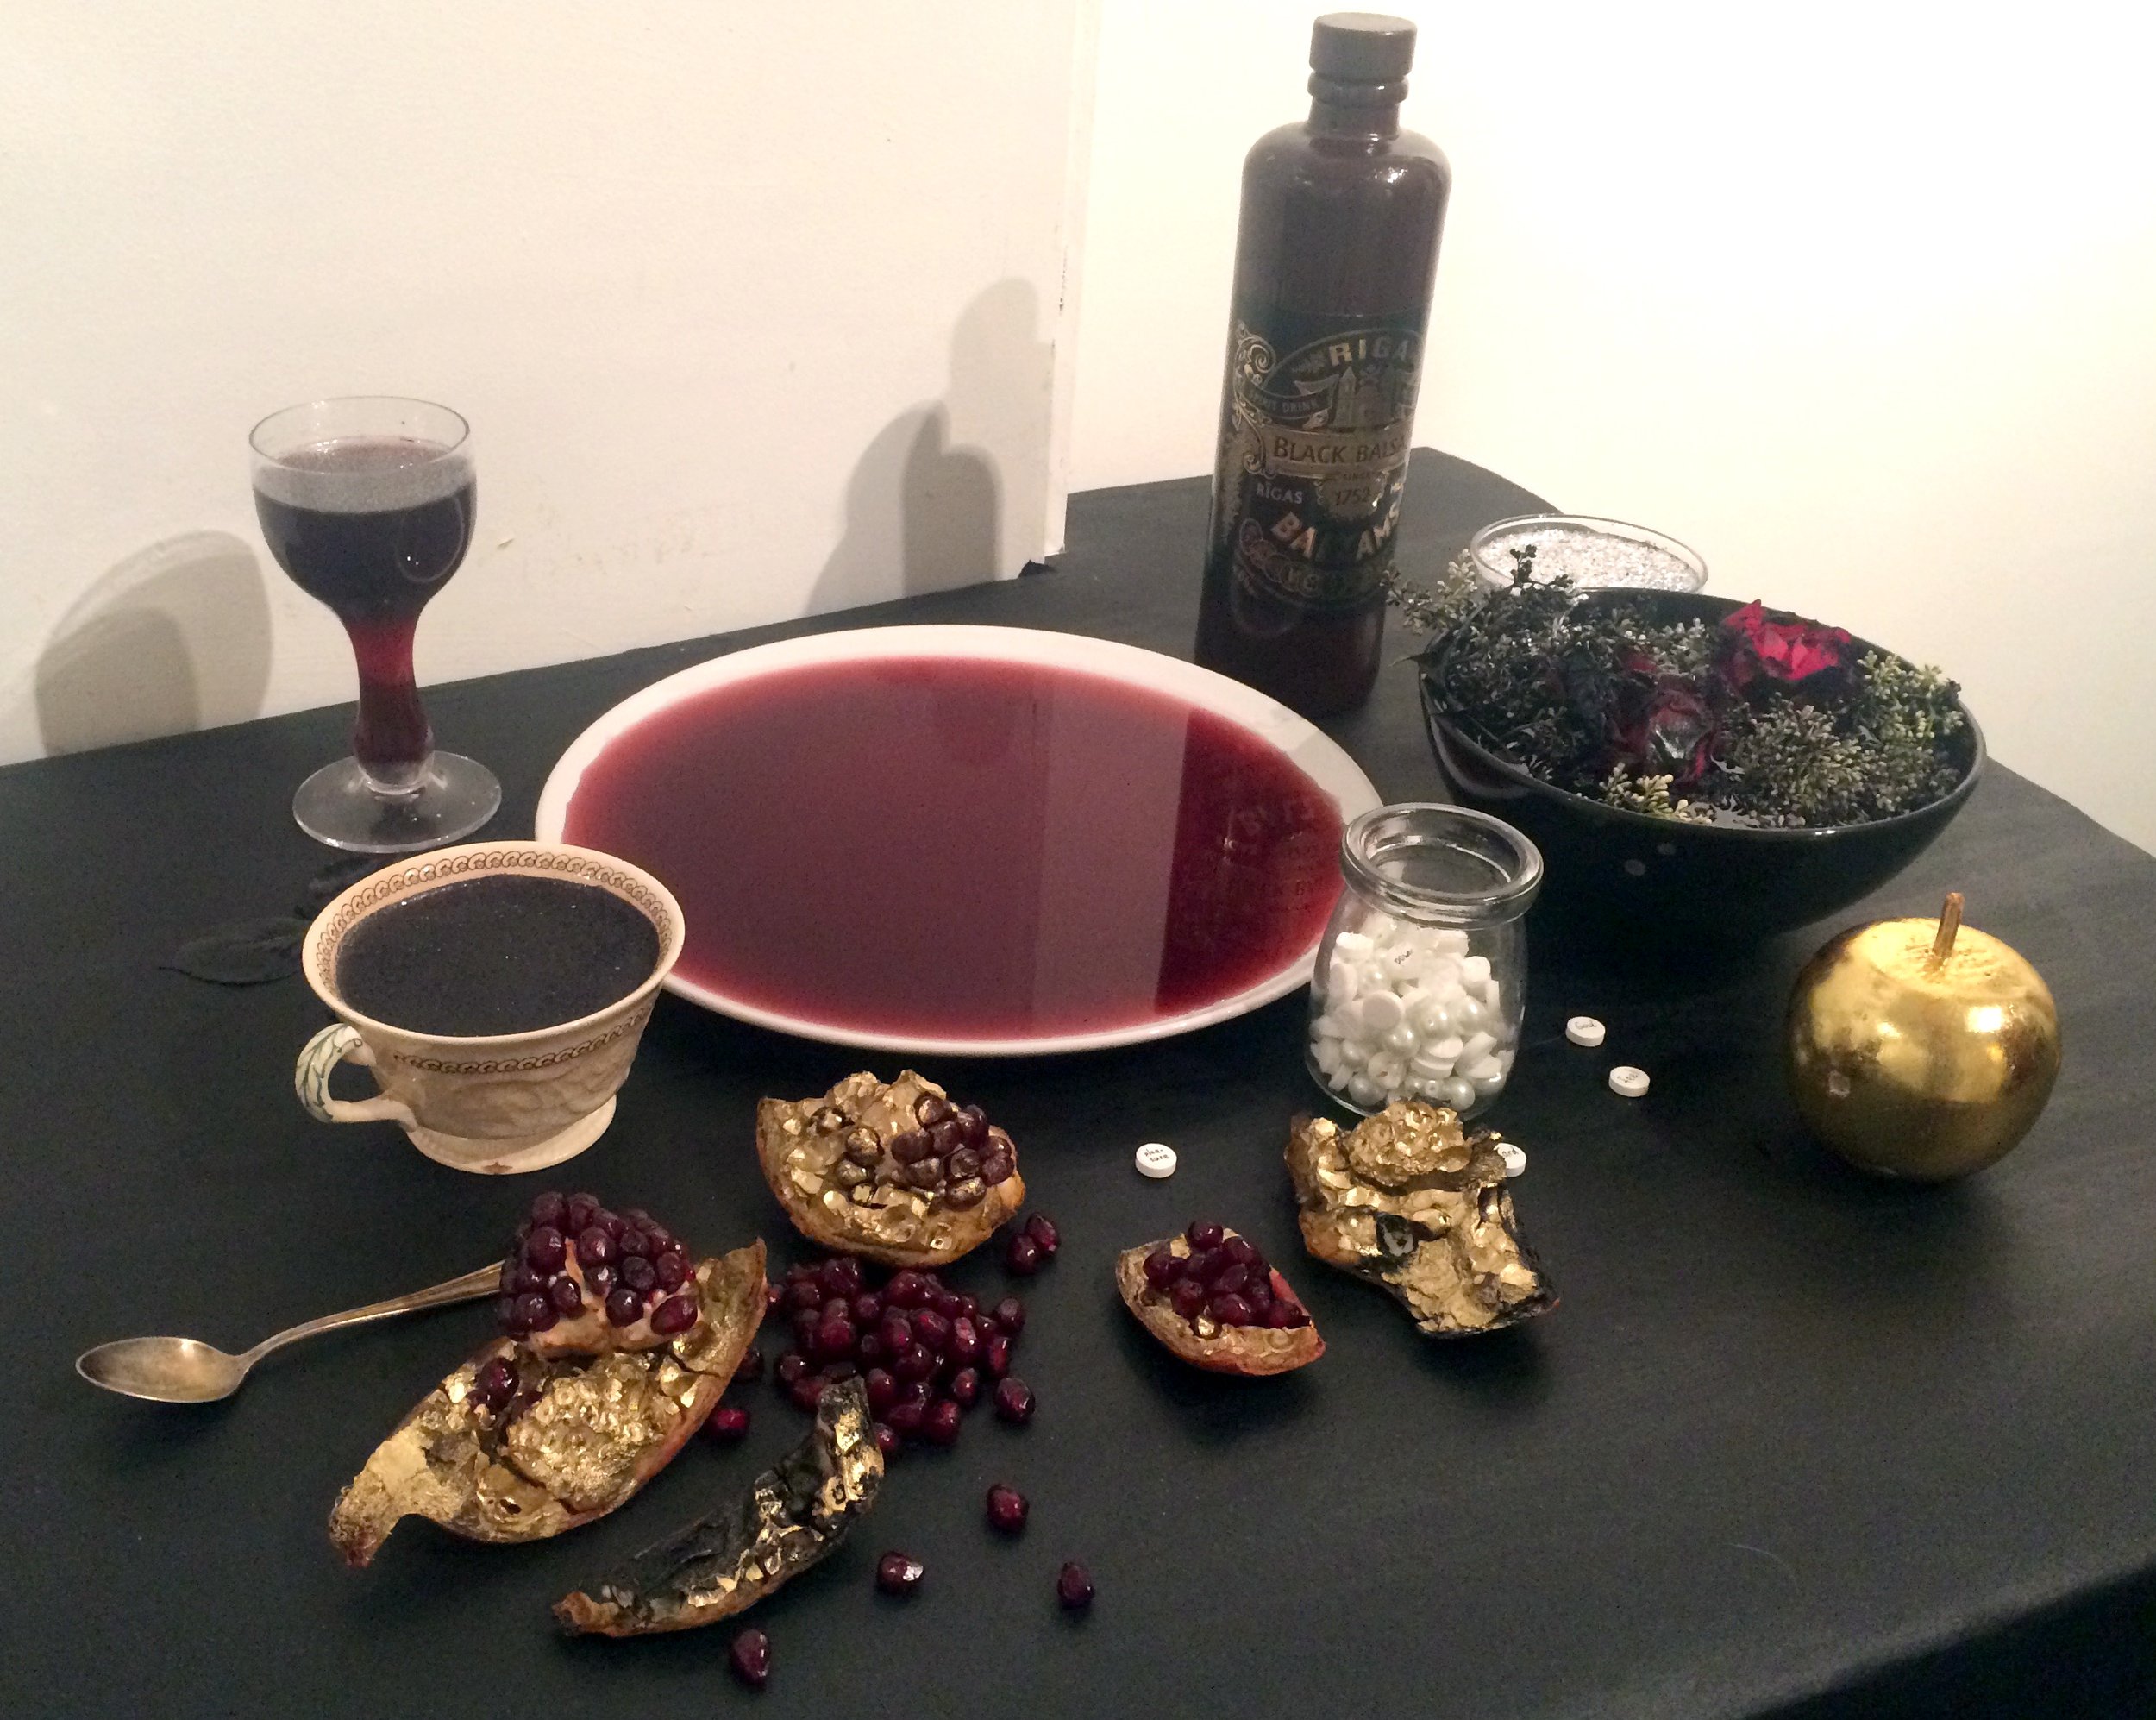 A still life with pomegranate